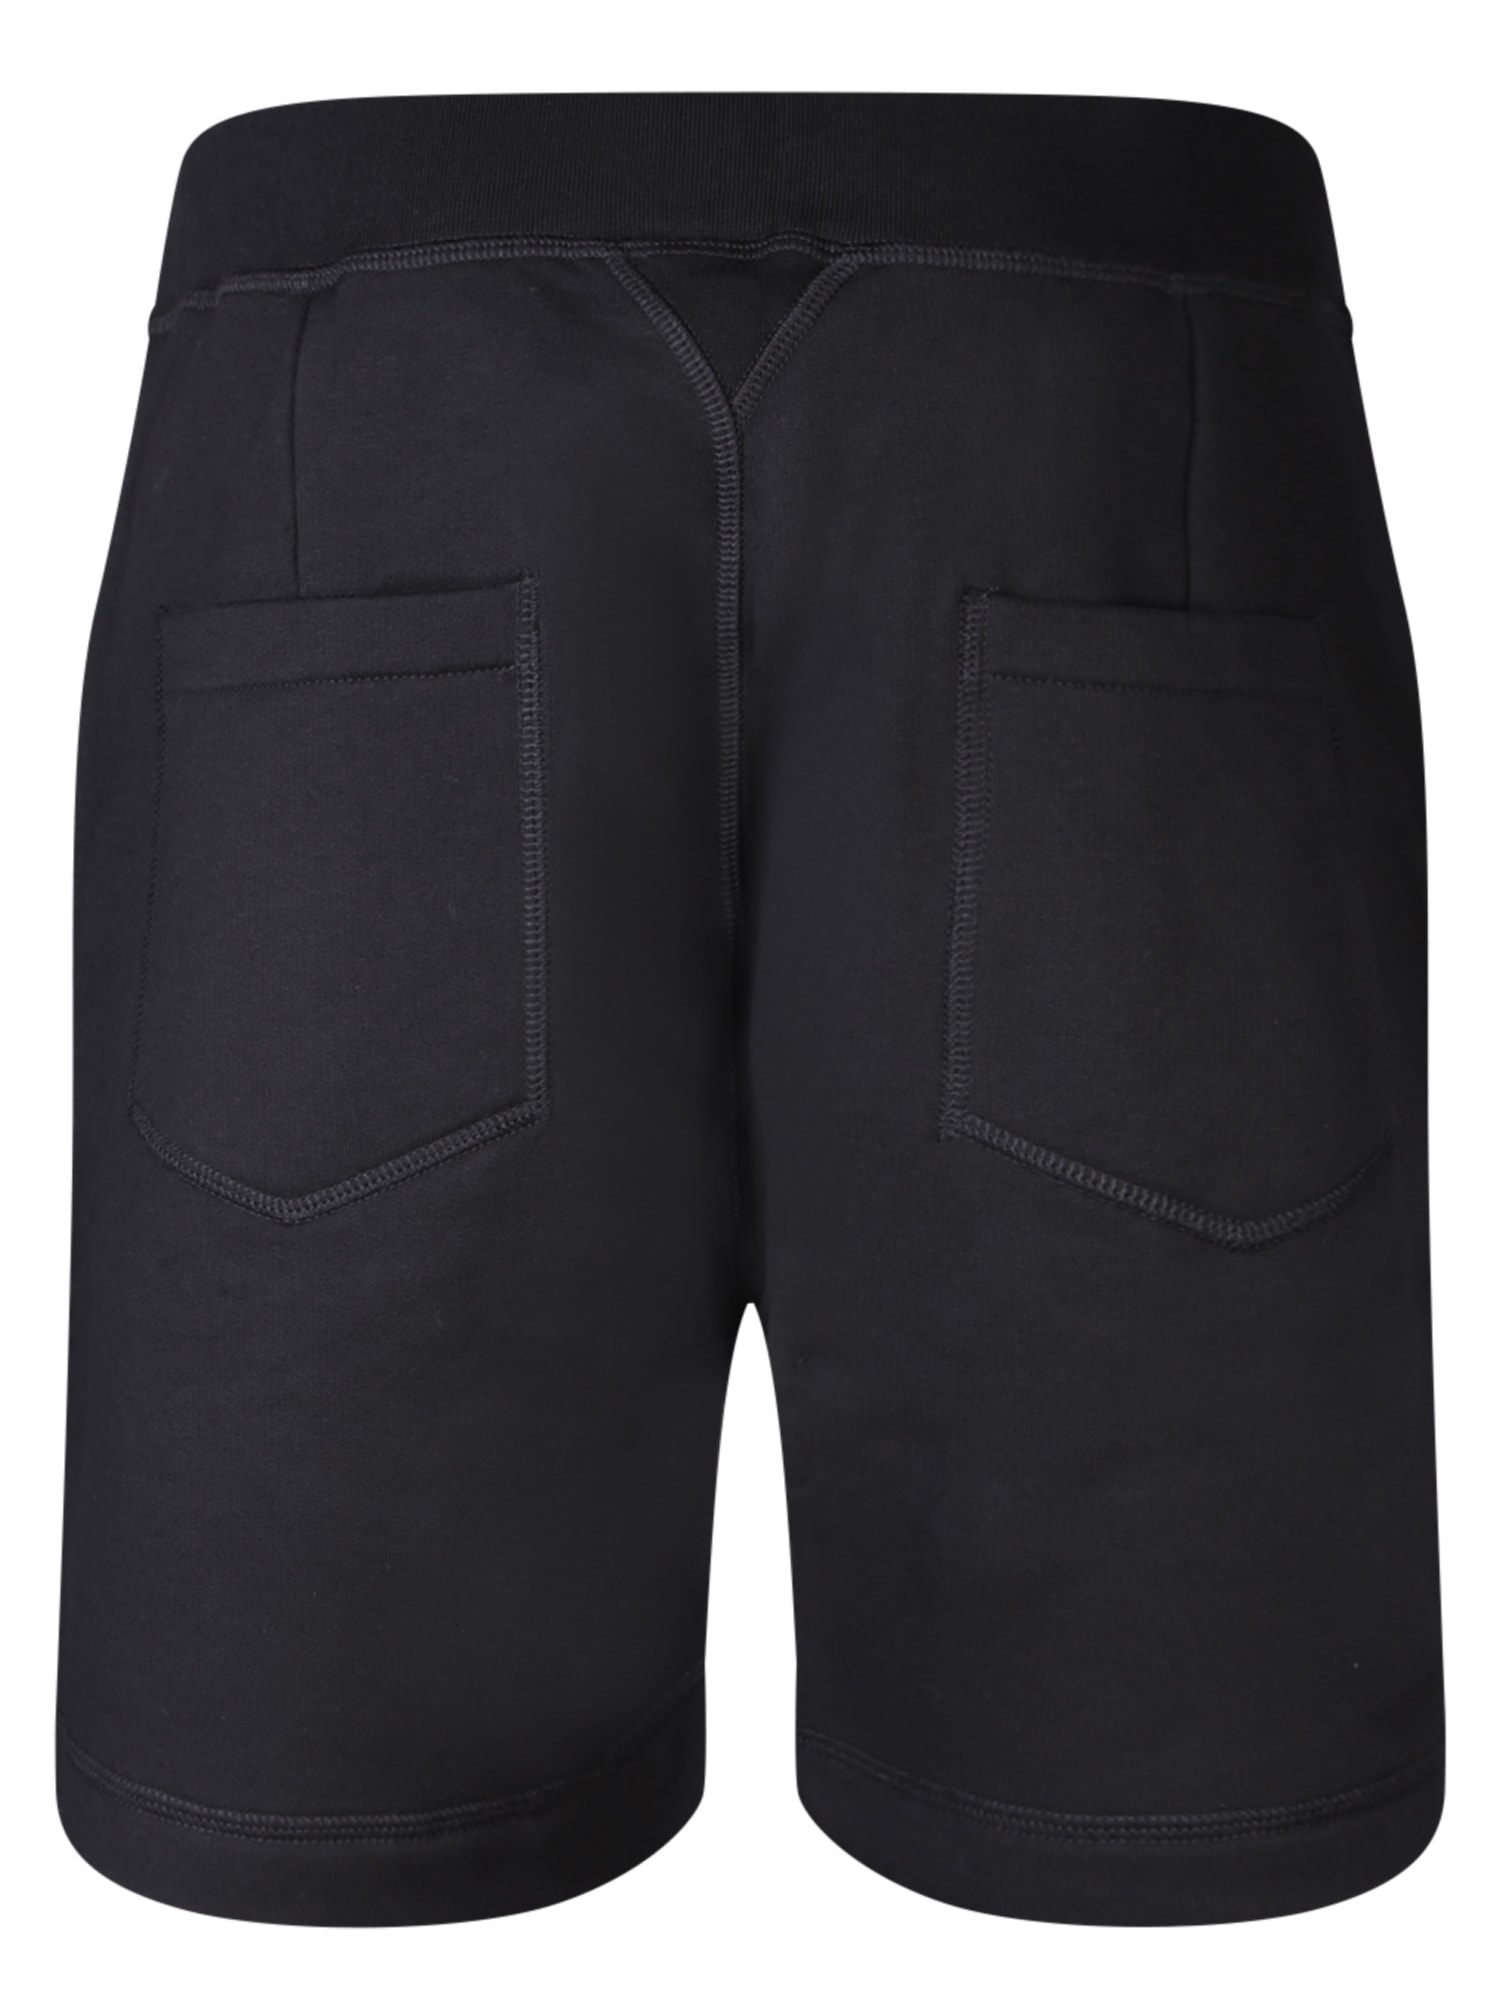 Shop Dsquared2 Be Icon Relax Black Shorts